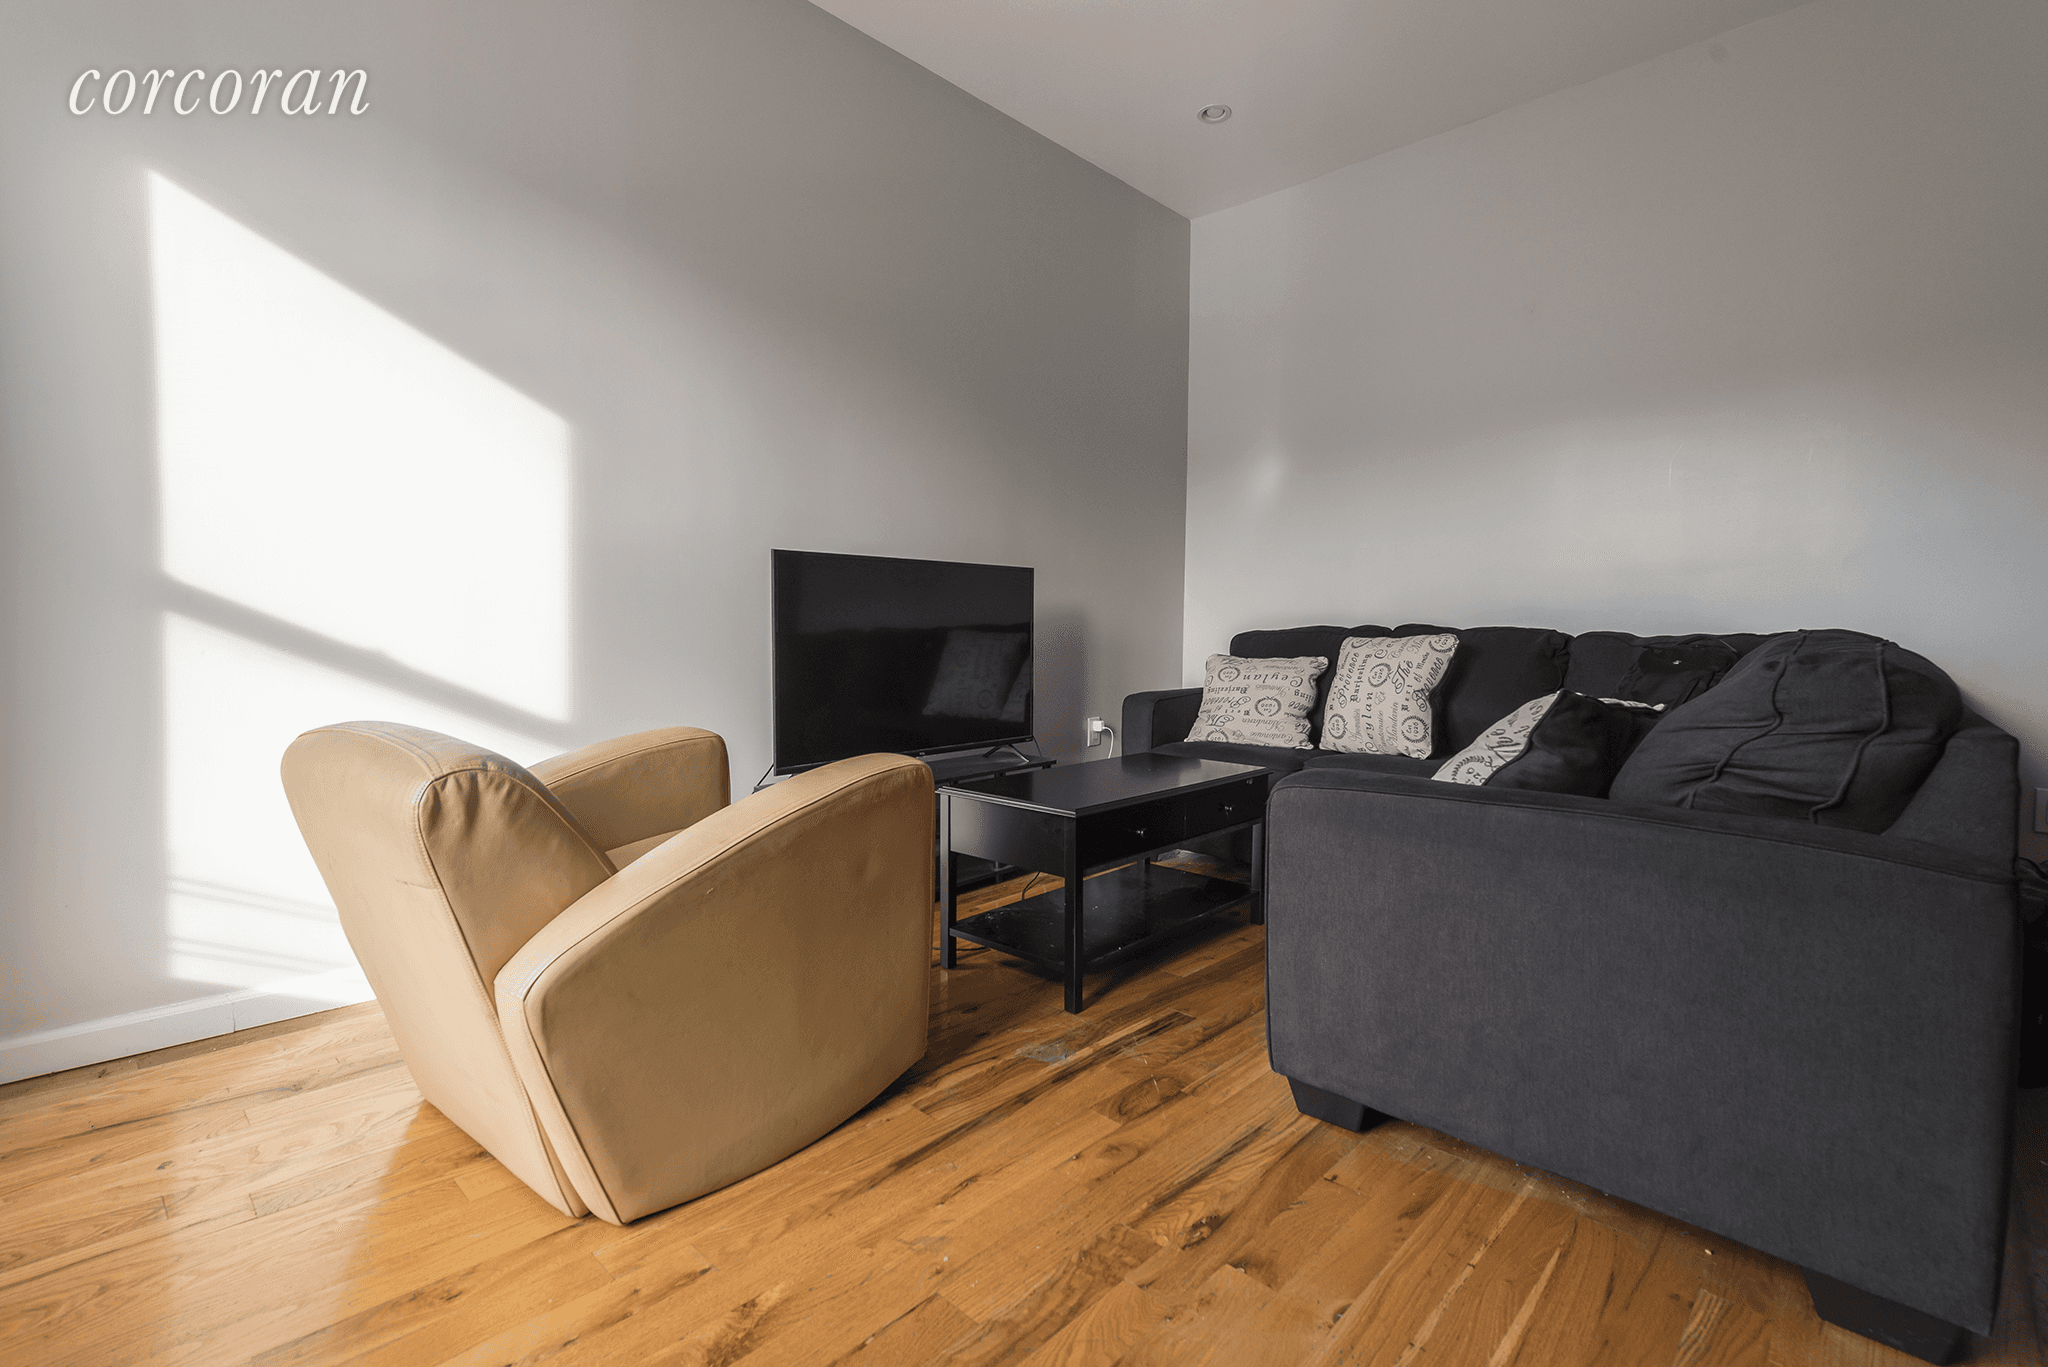 Come and see this spacious and sunny 2 bedrooms and 1 bathroom apartment located right by the Nostrand Avenue A C train station !